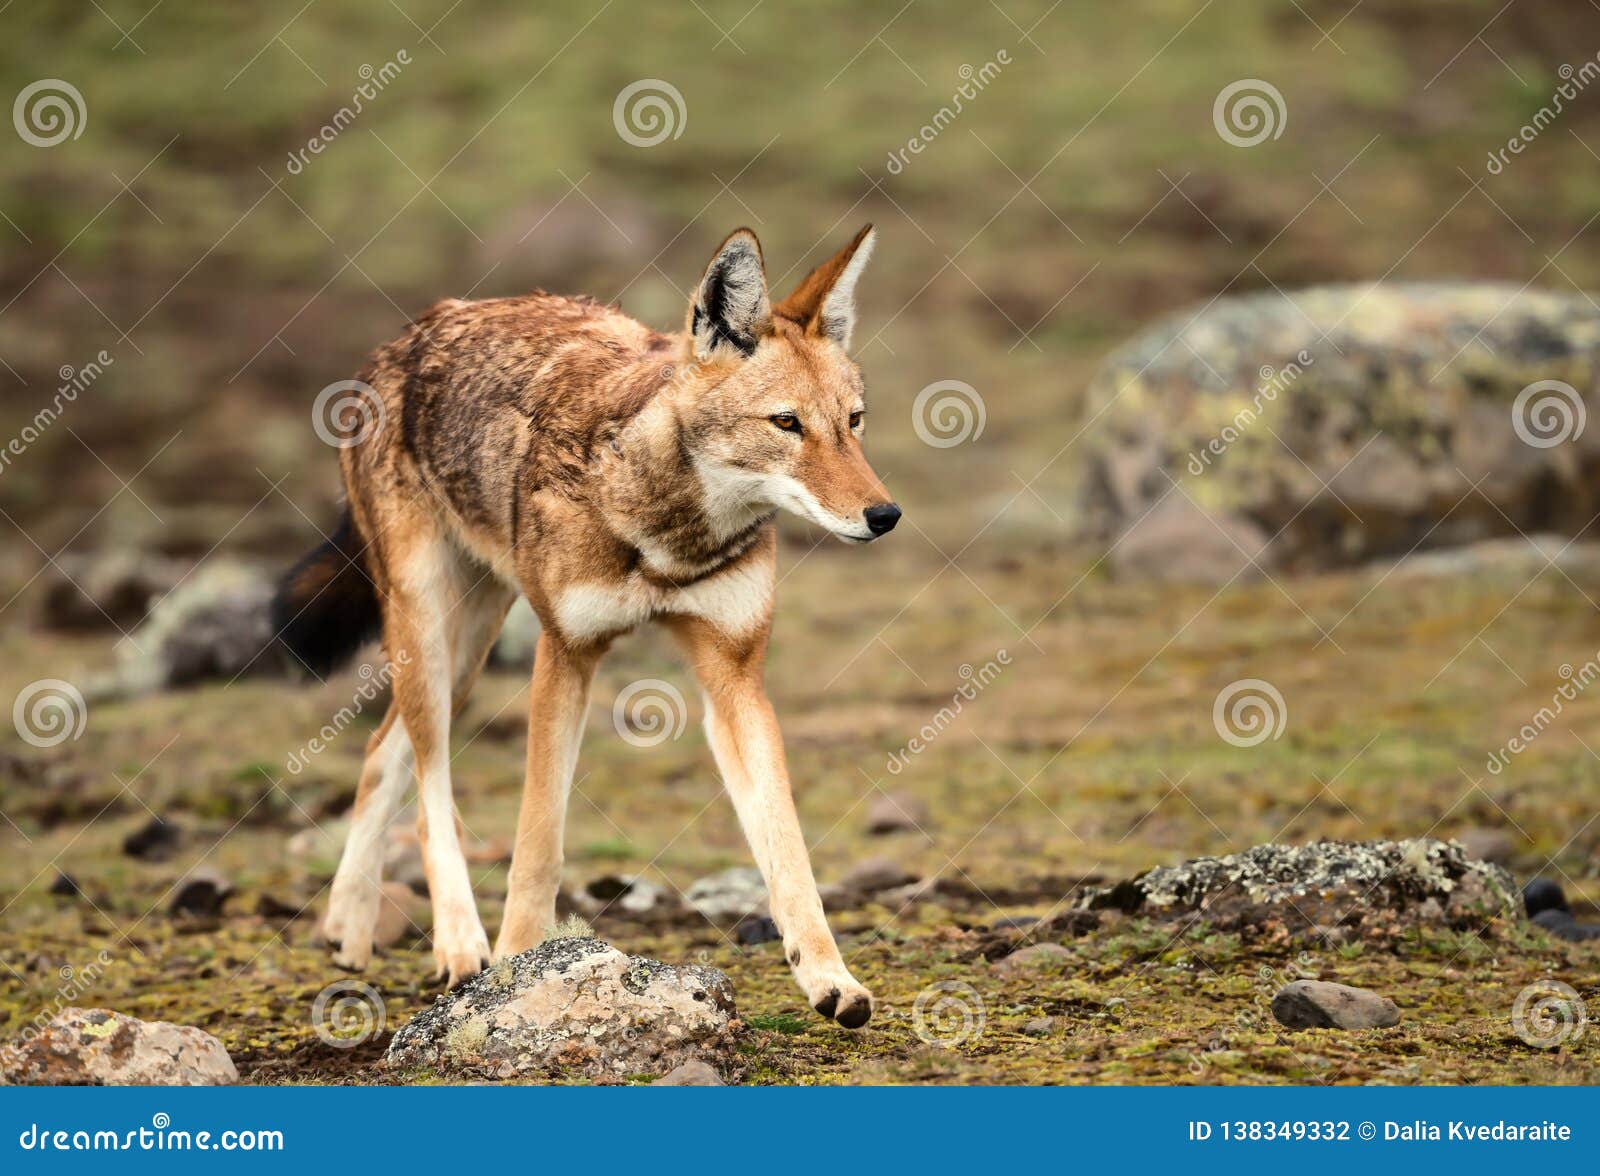 close up of ethiopian wolf, the most threatened canid in the world